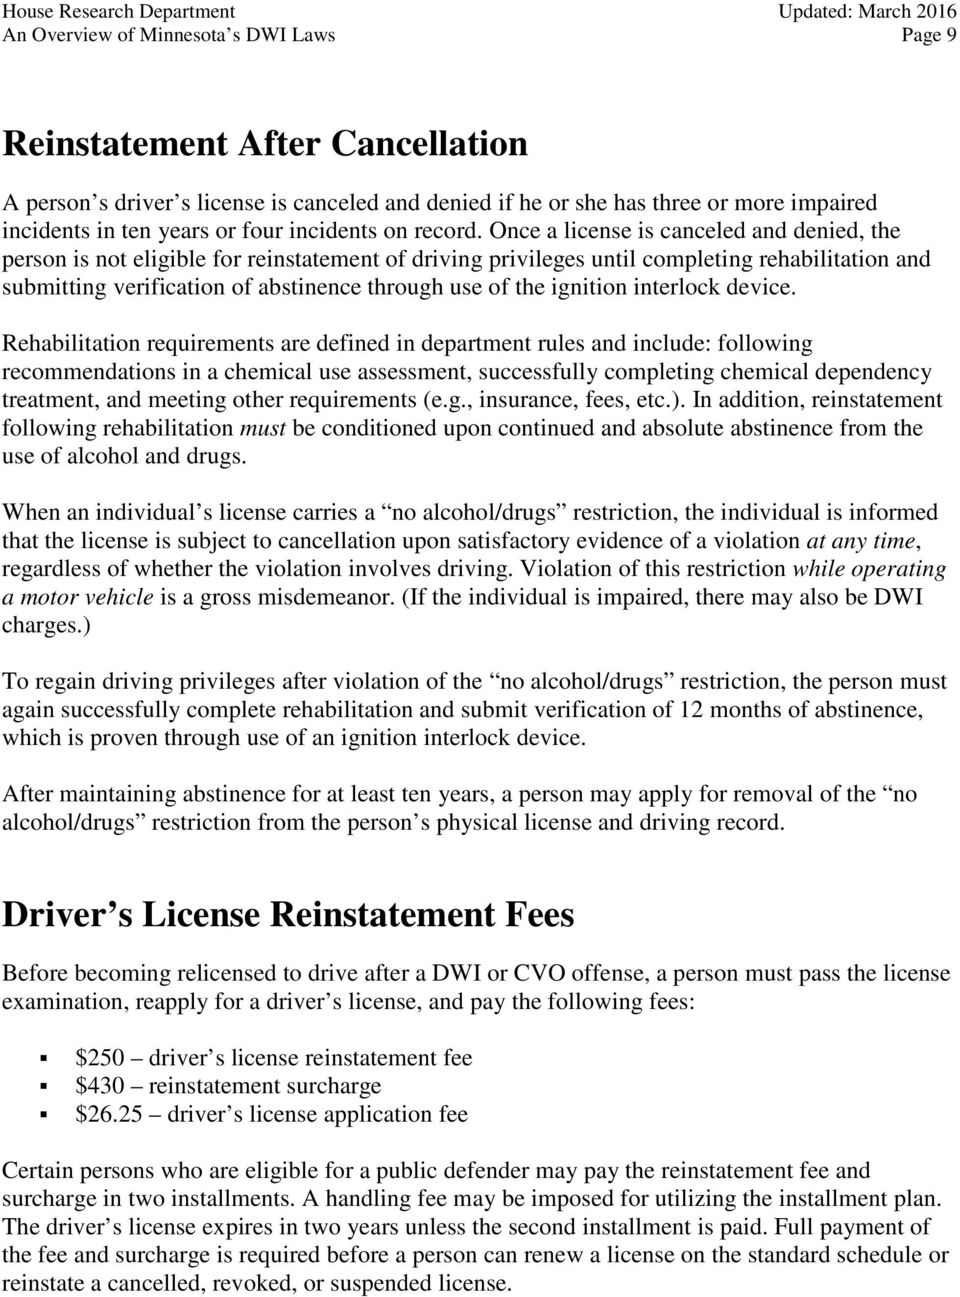 Once a license is canceled and denied, the person is not eligible for reinstatement of driving privileges until completing rehabilitation and submitting verification of abstinence through use of the